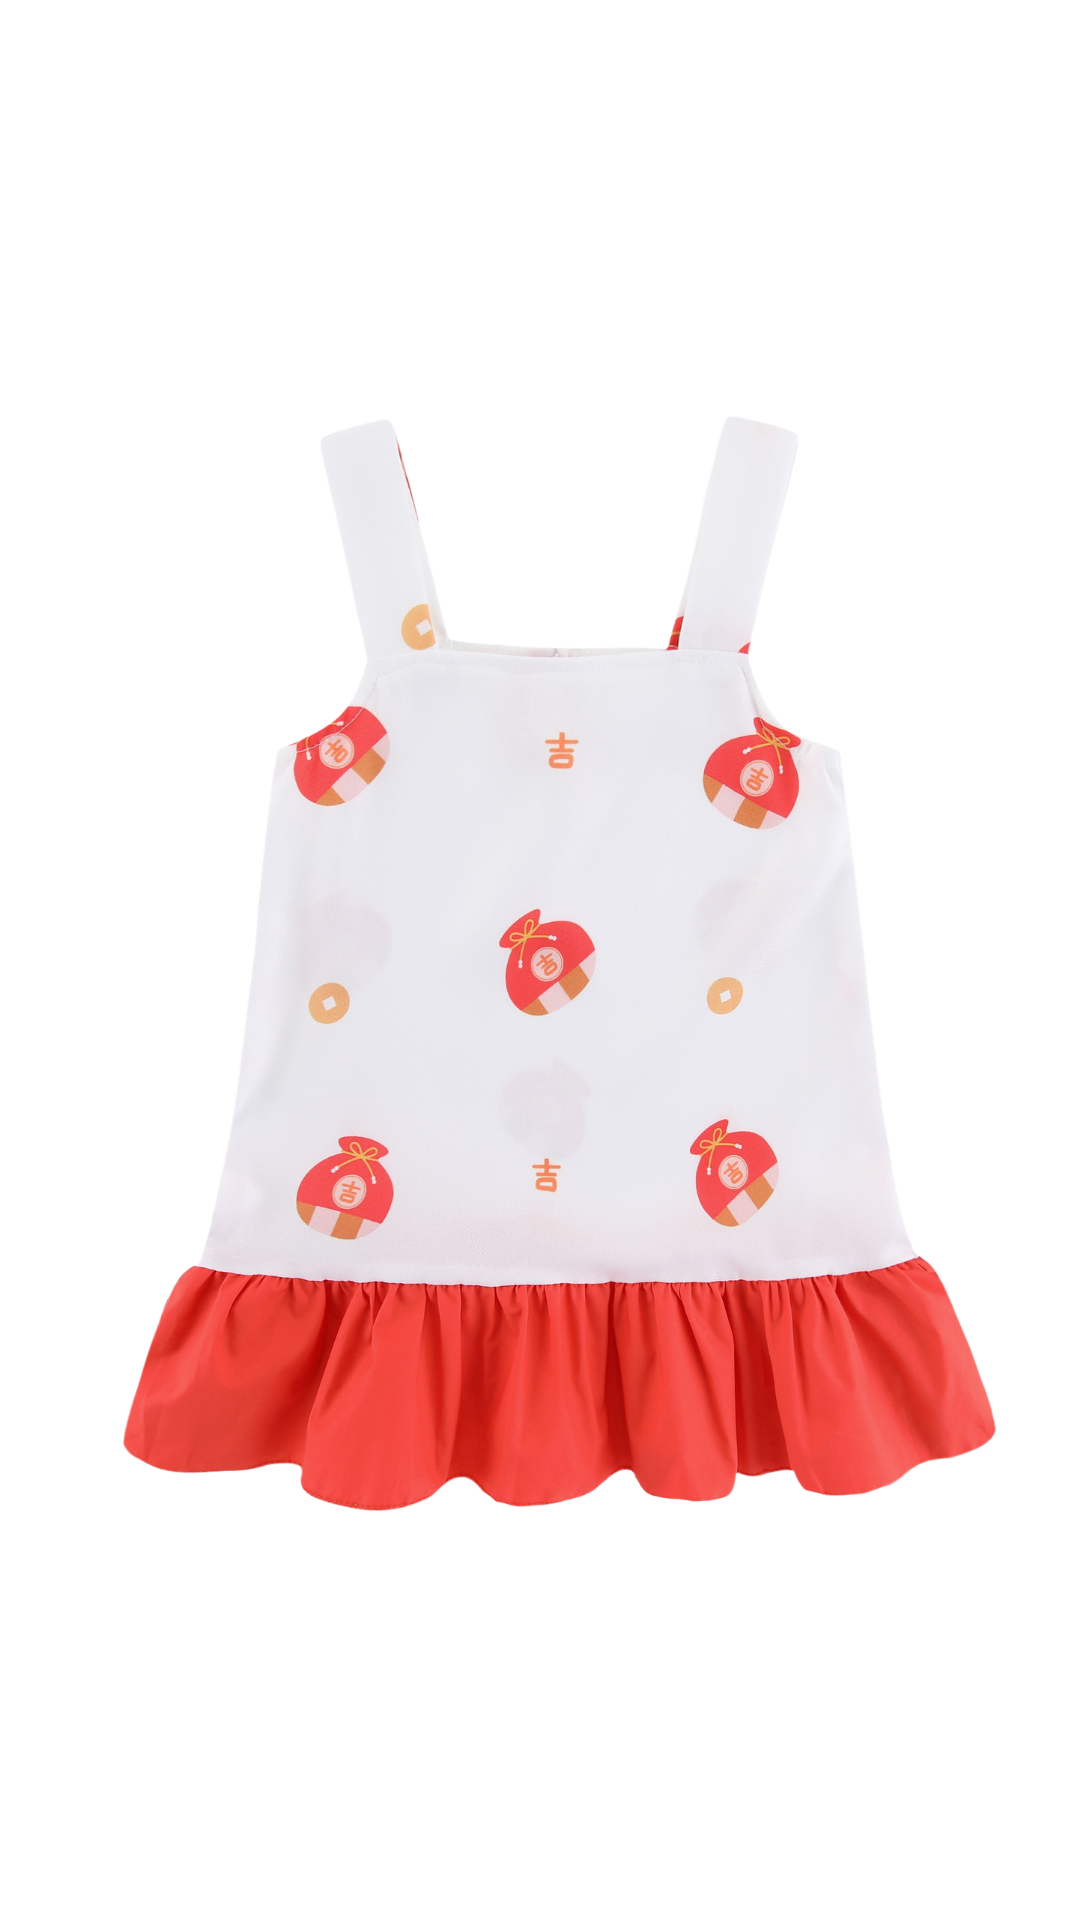 Girl Babydoll Tiered Dress Fortune Bag